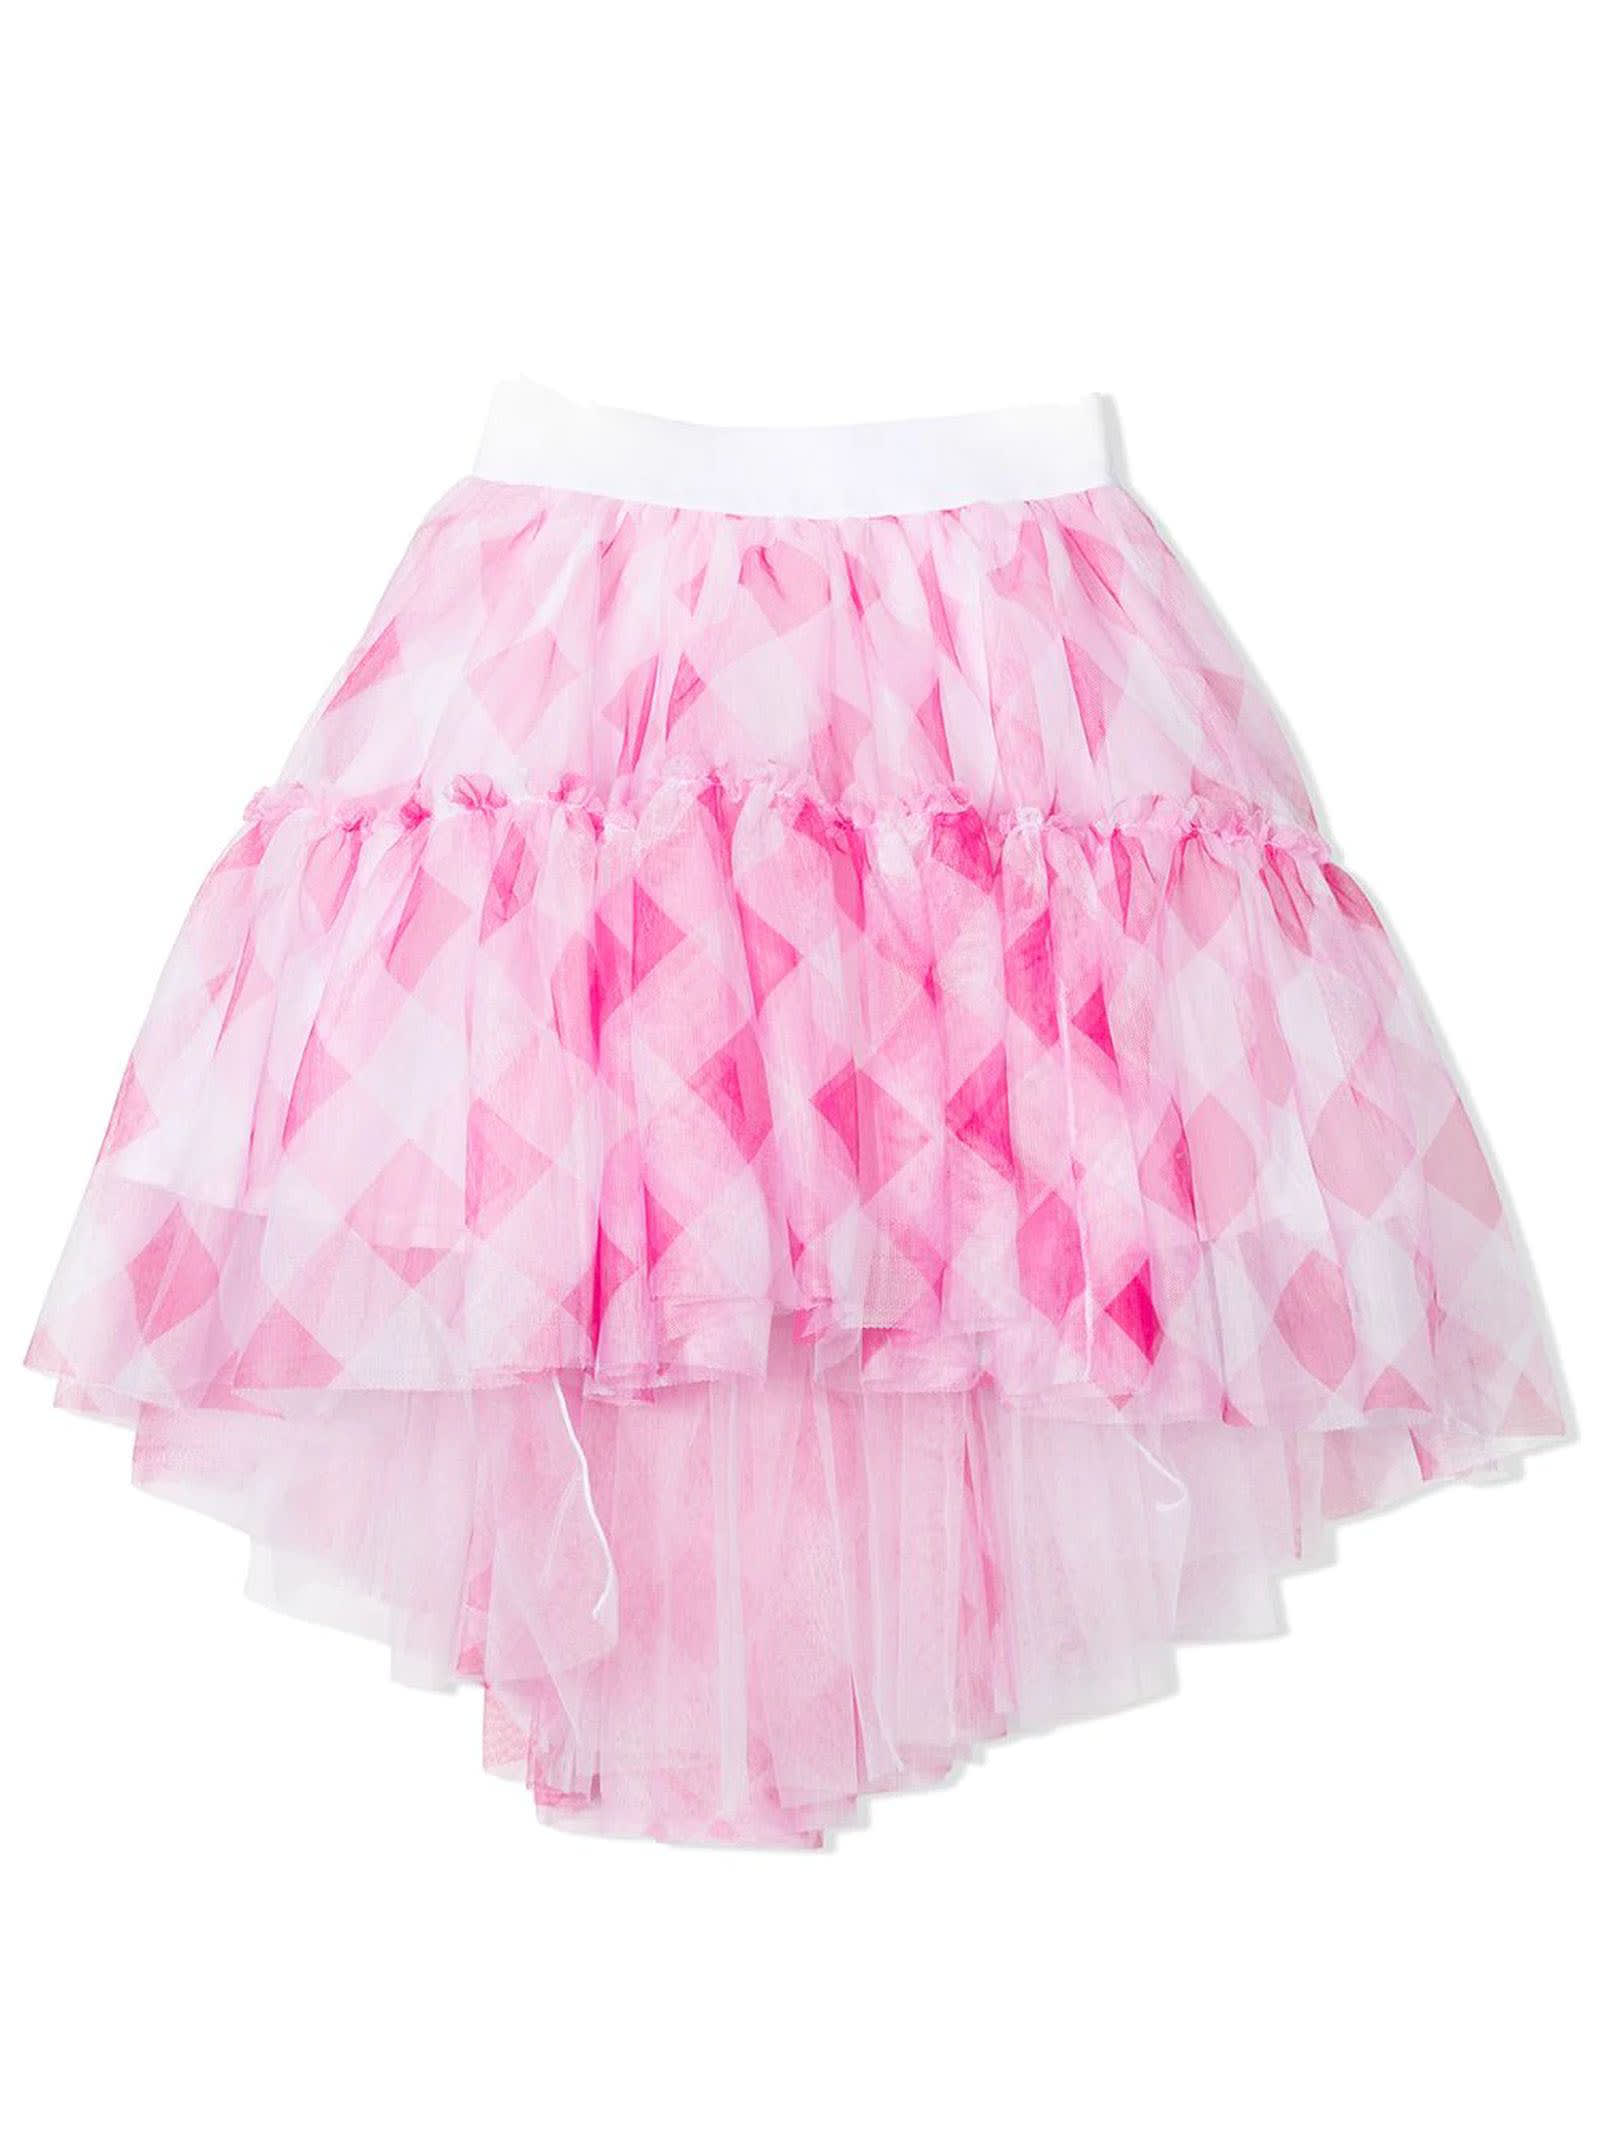 Monnalisa White And Pink Tulle Skirt